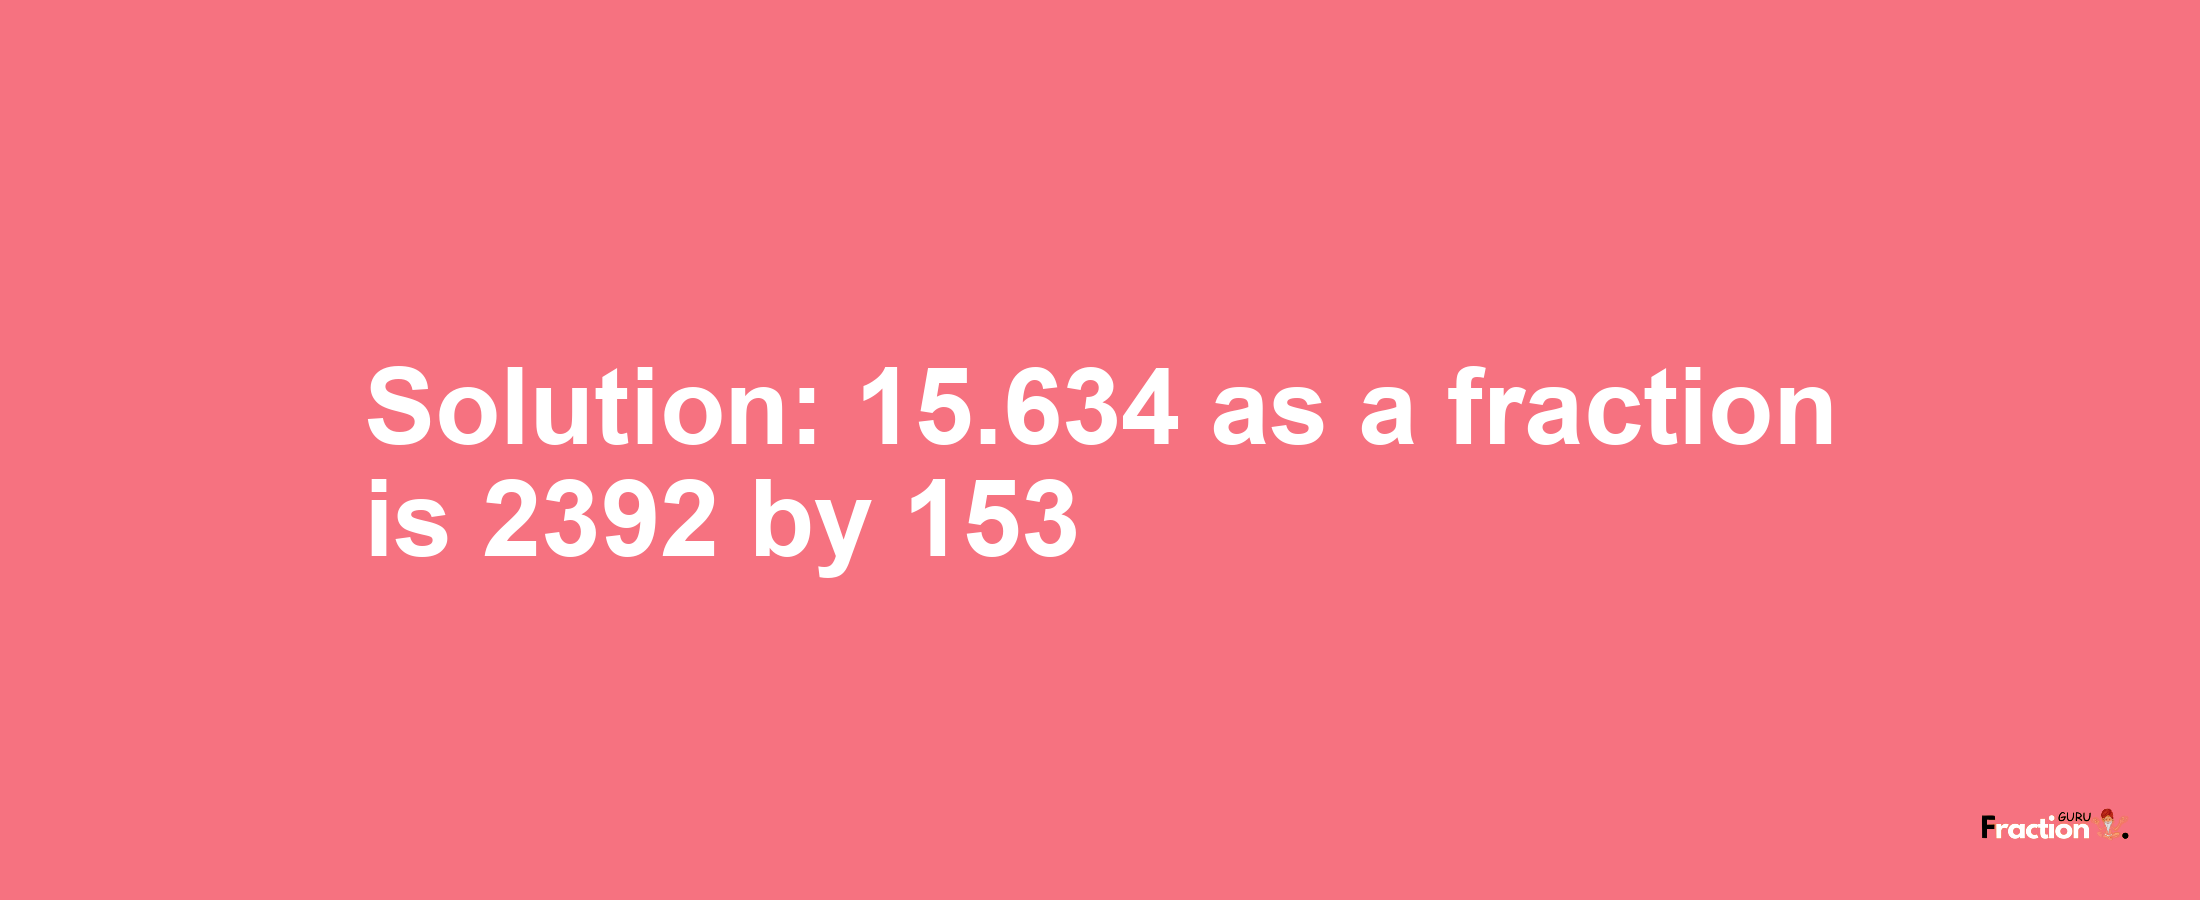 Solution:15.634 as a fraction is 2392/153